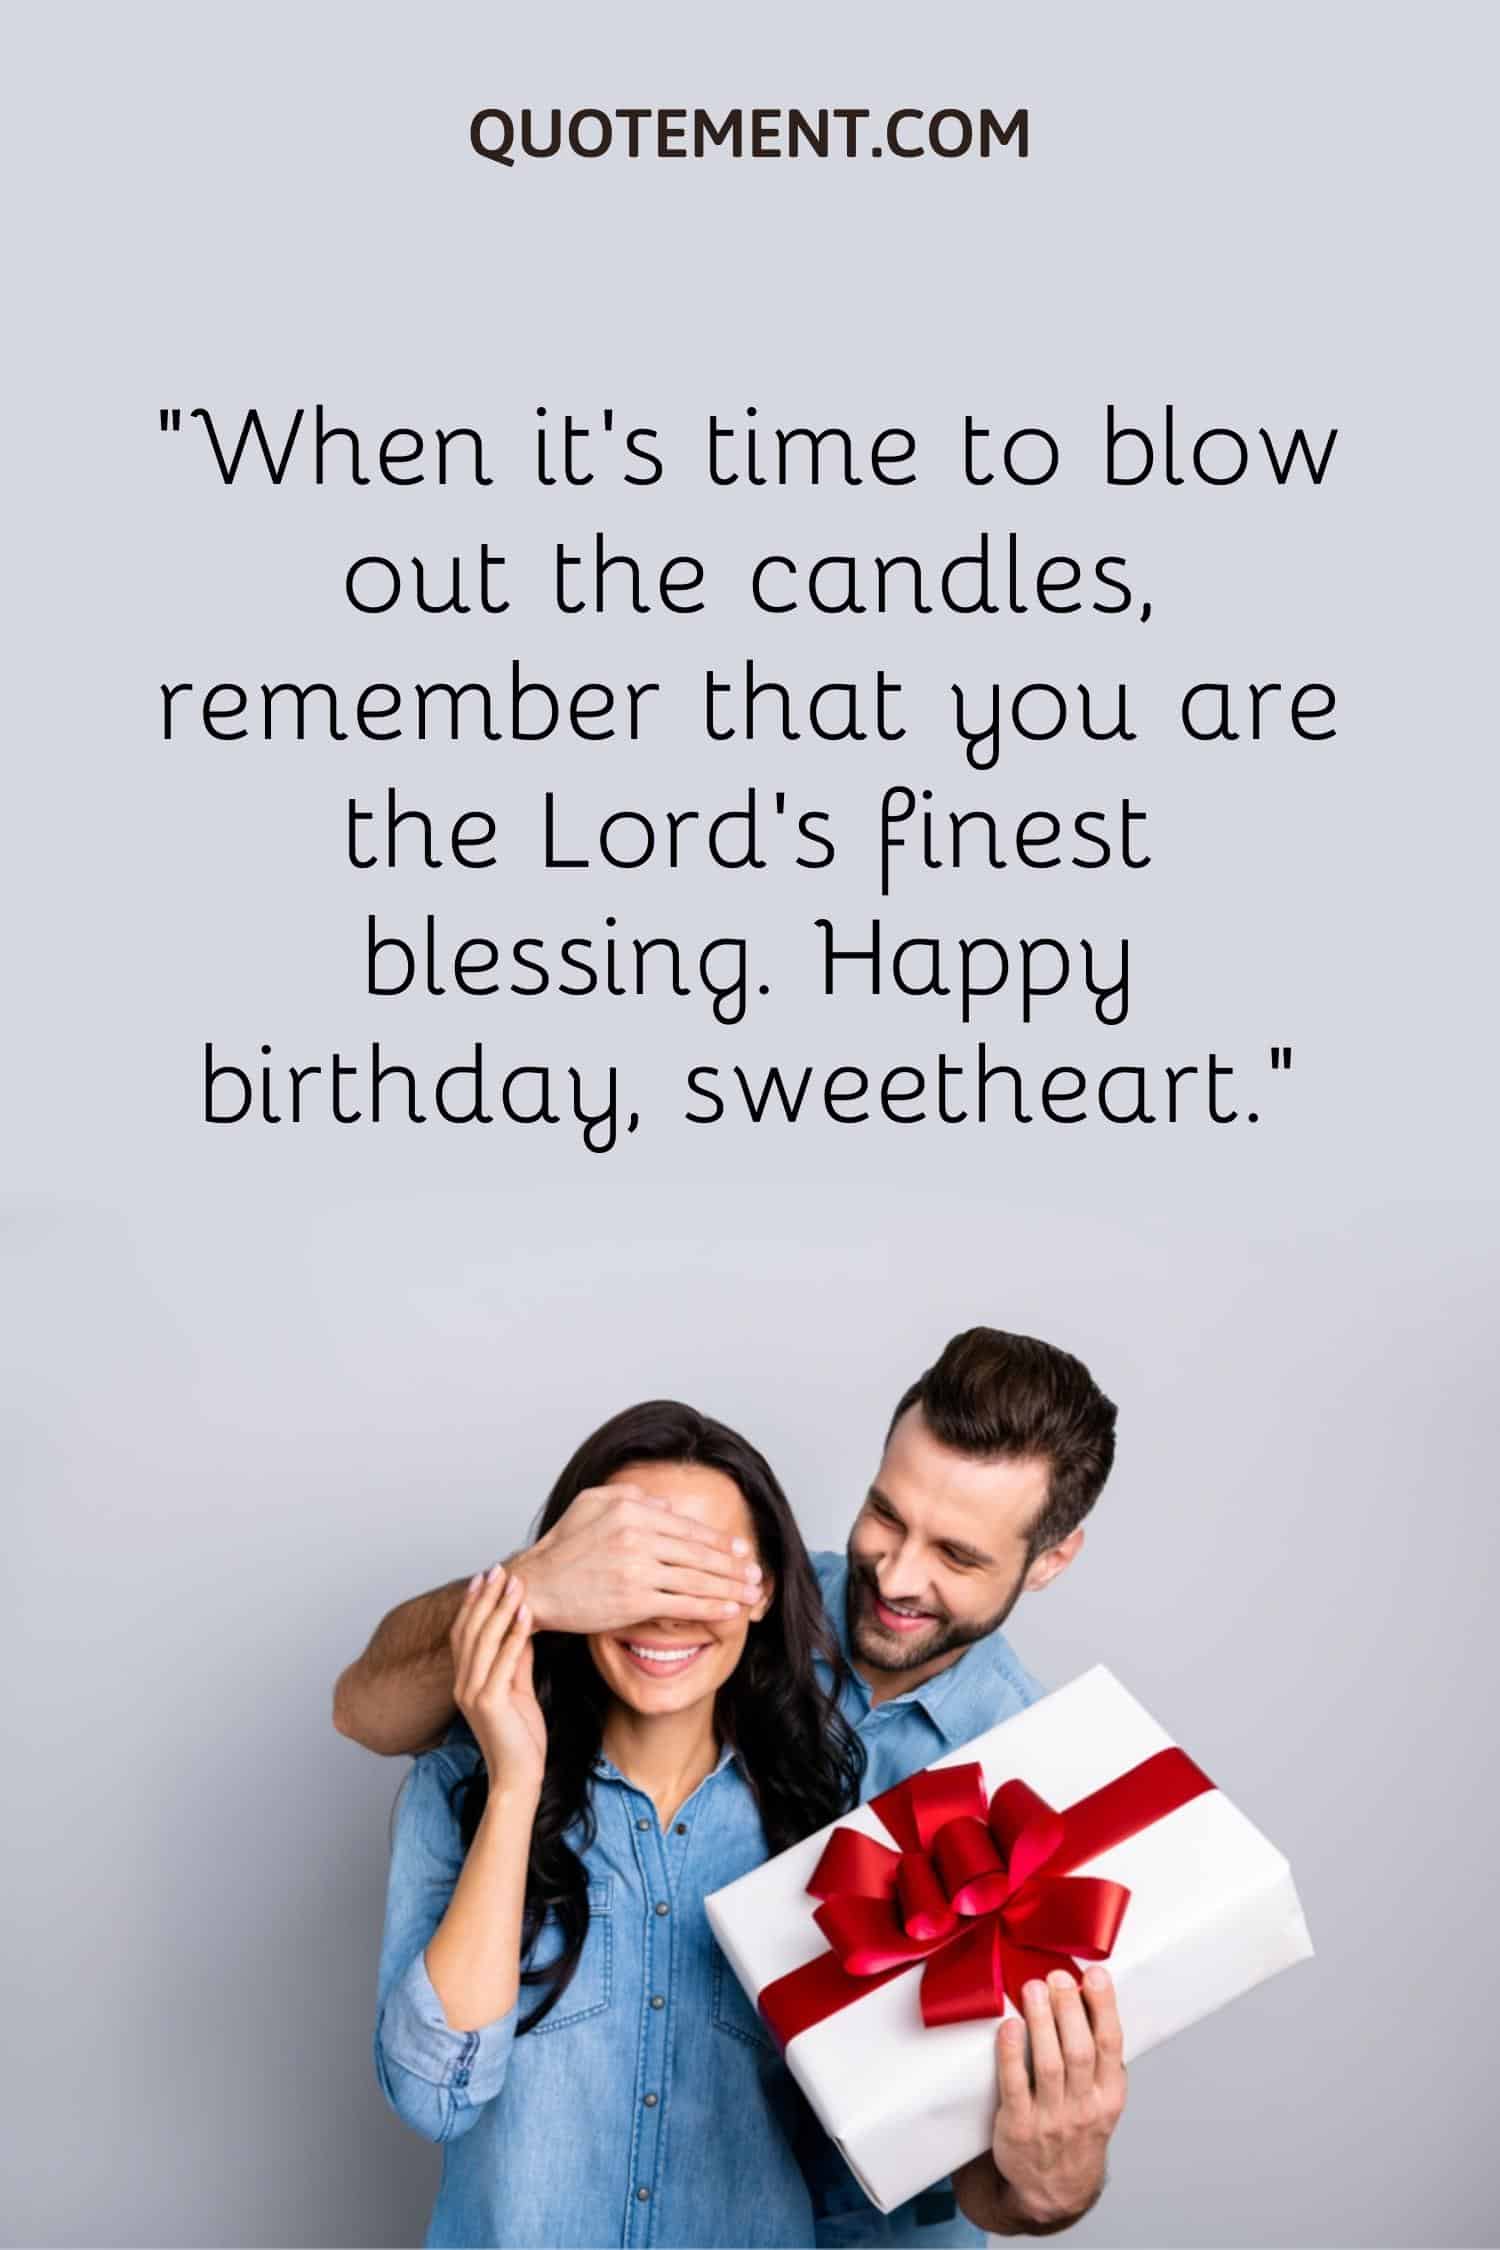  remember that you are the Lord’s finest blessing